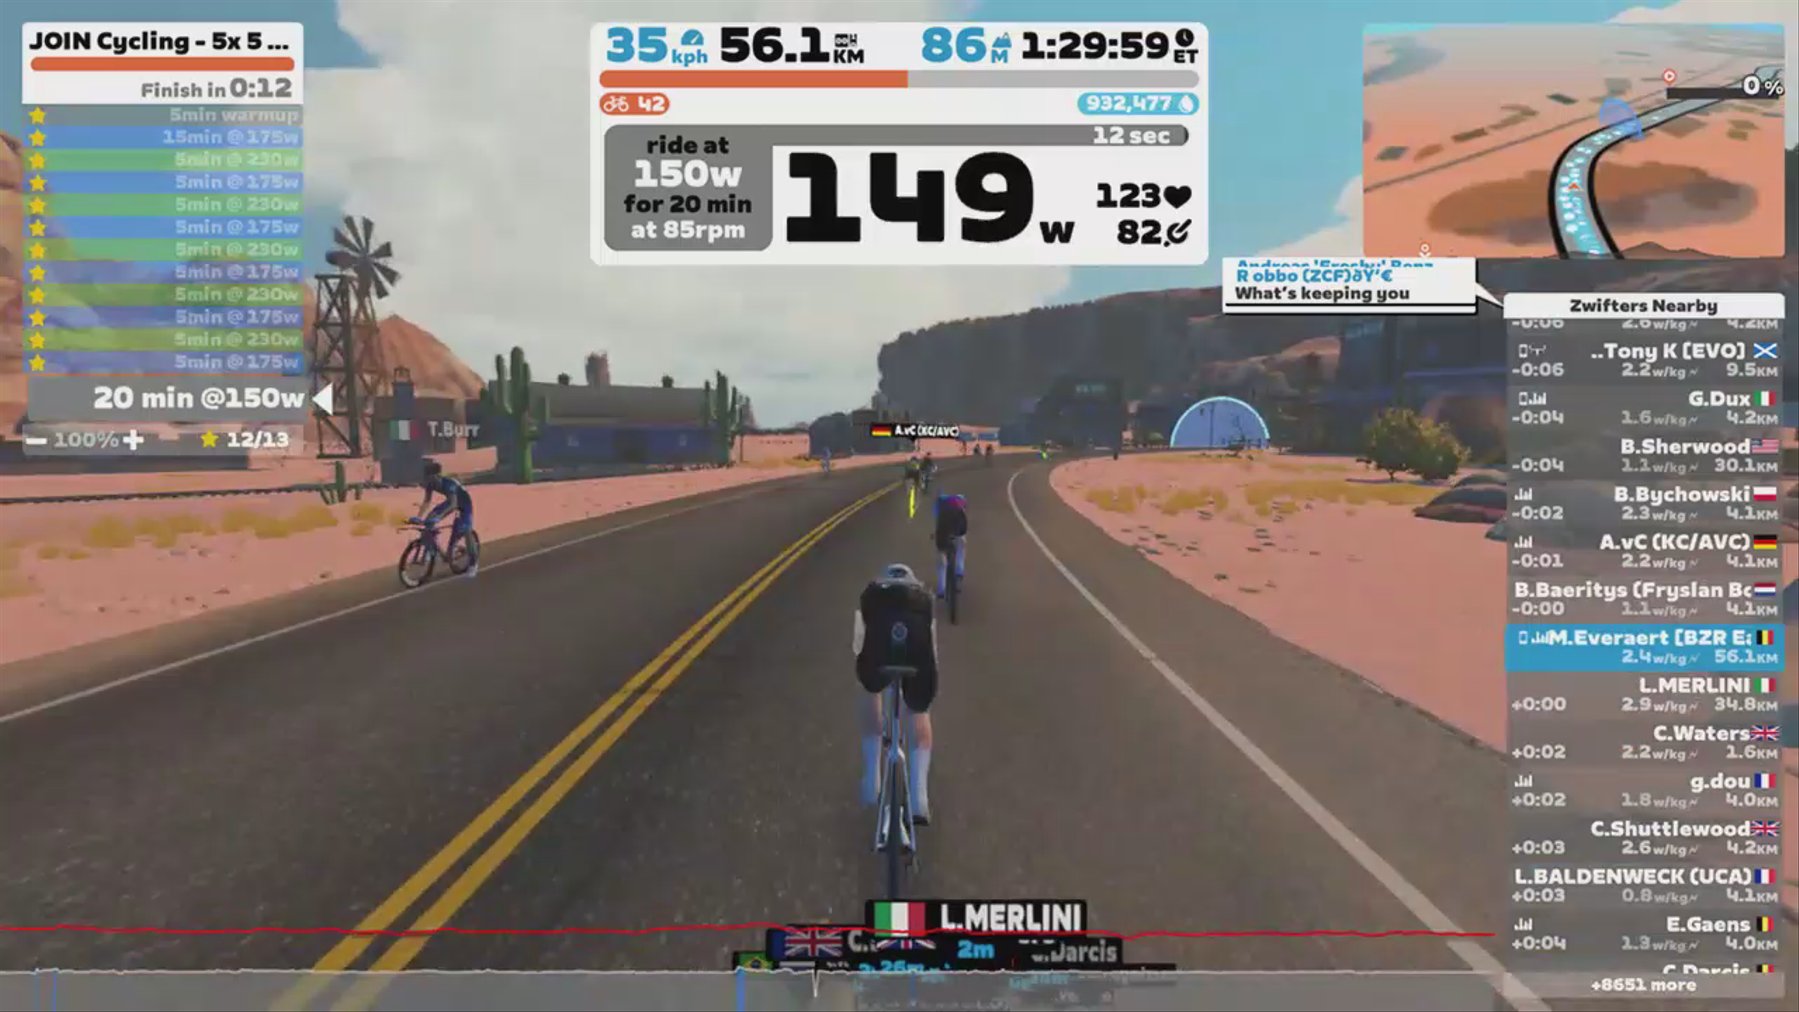 Zwift - JOIN Cycling - 5x 5 min tempo